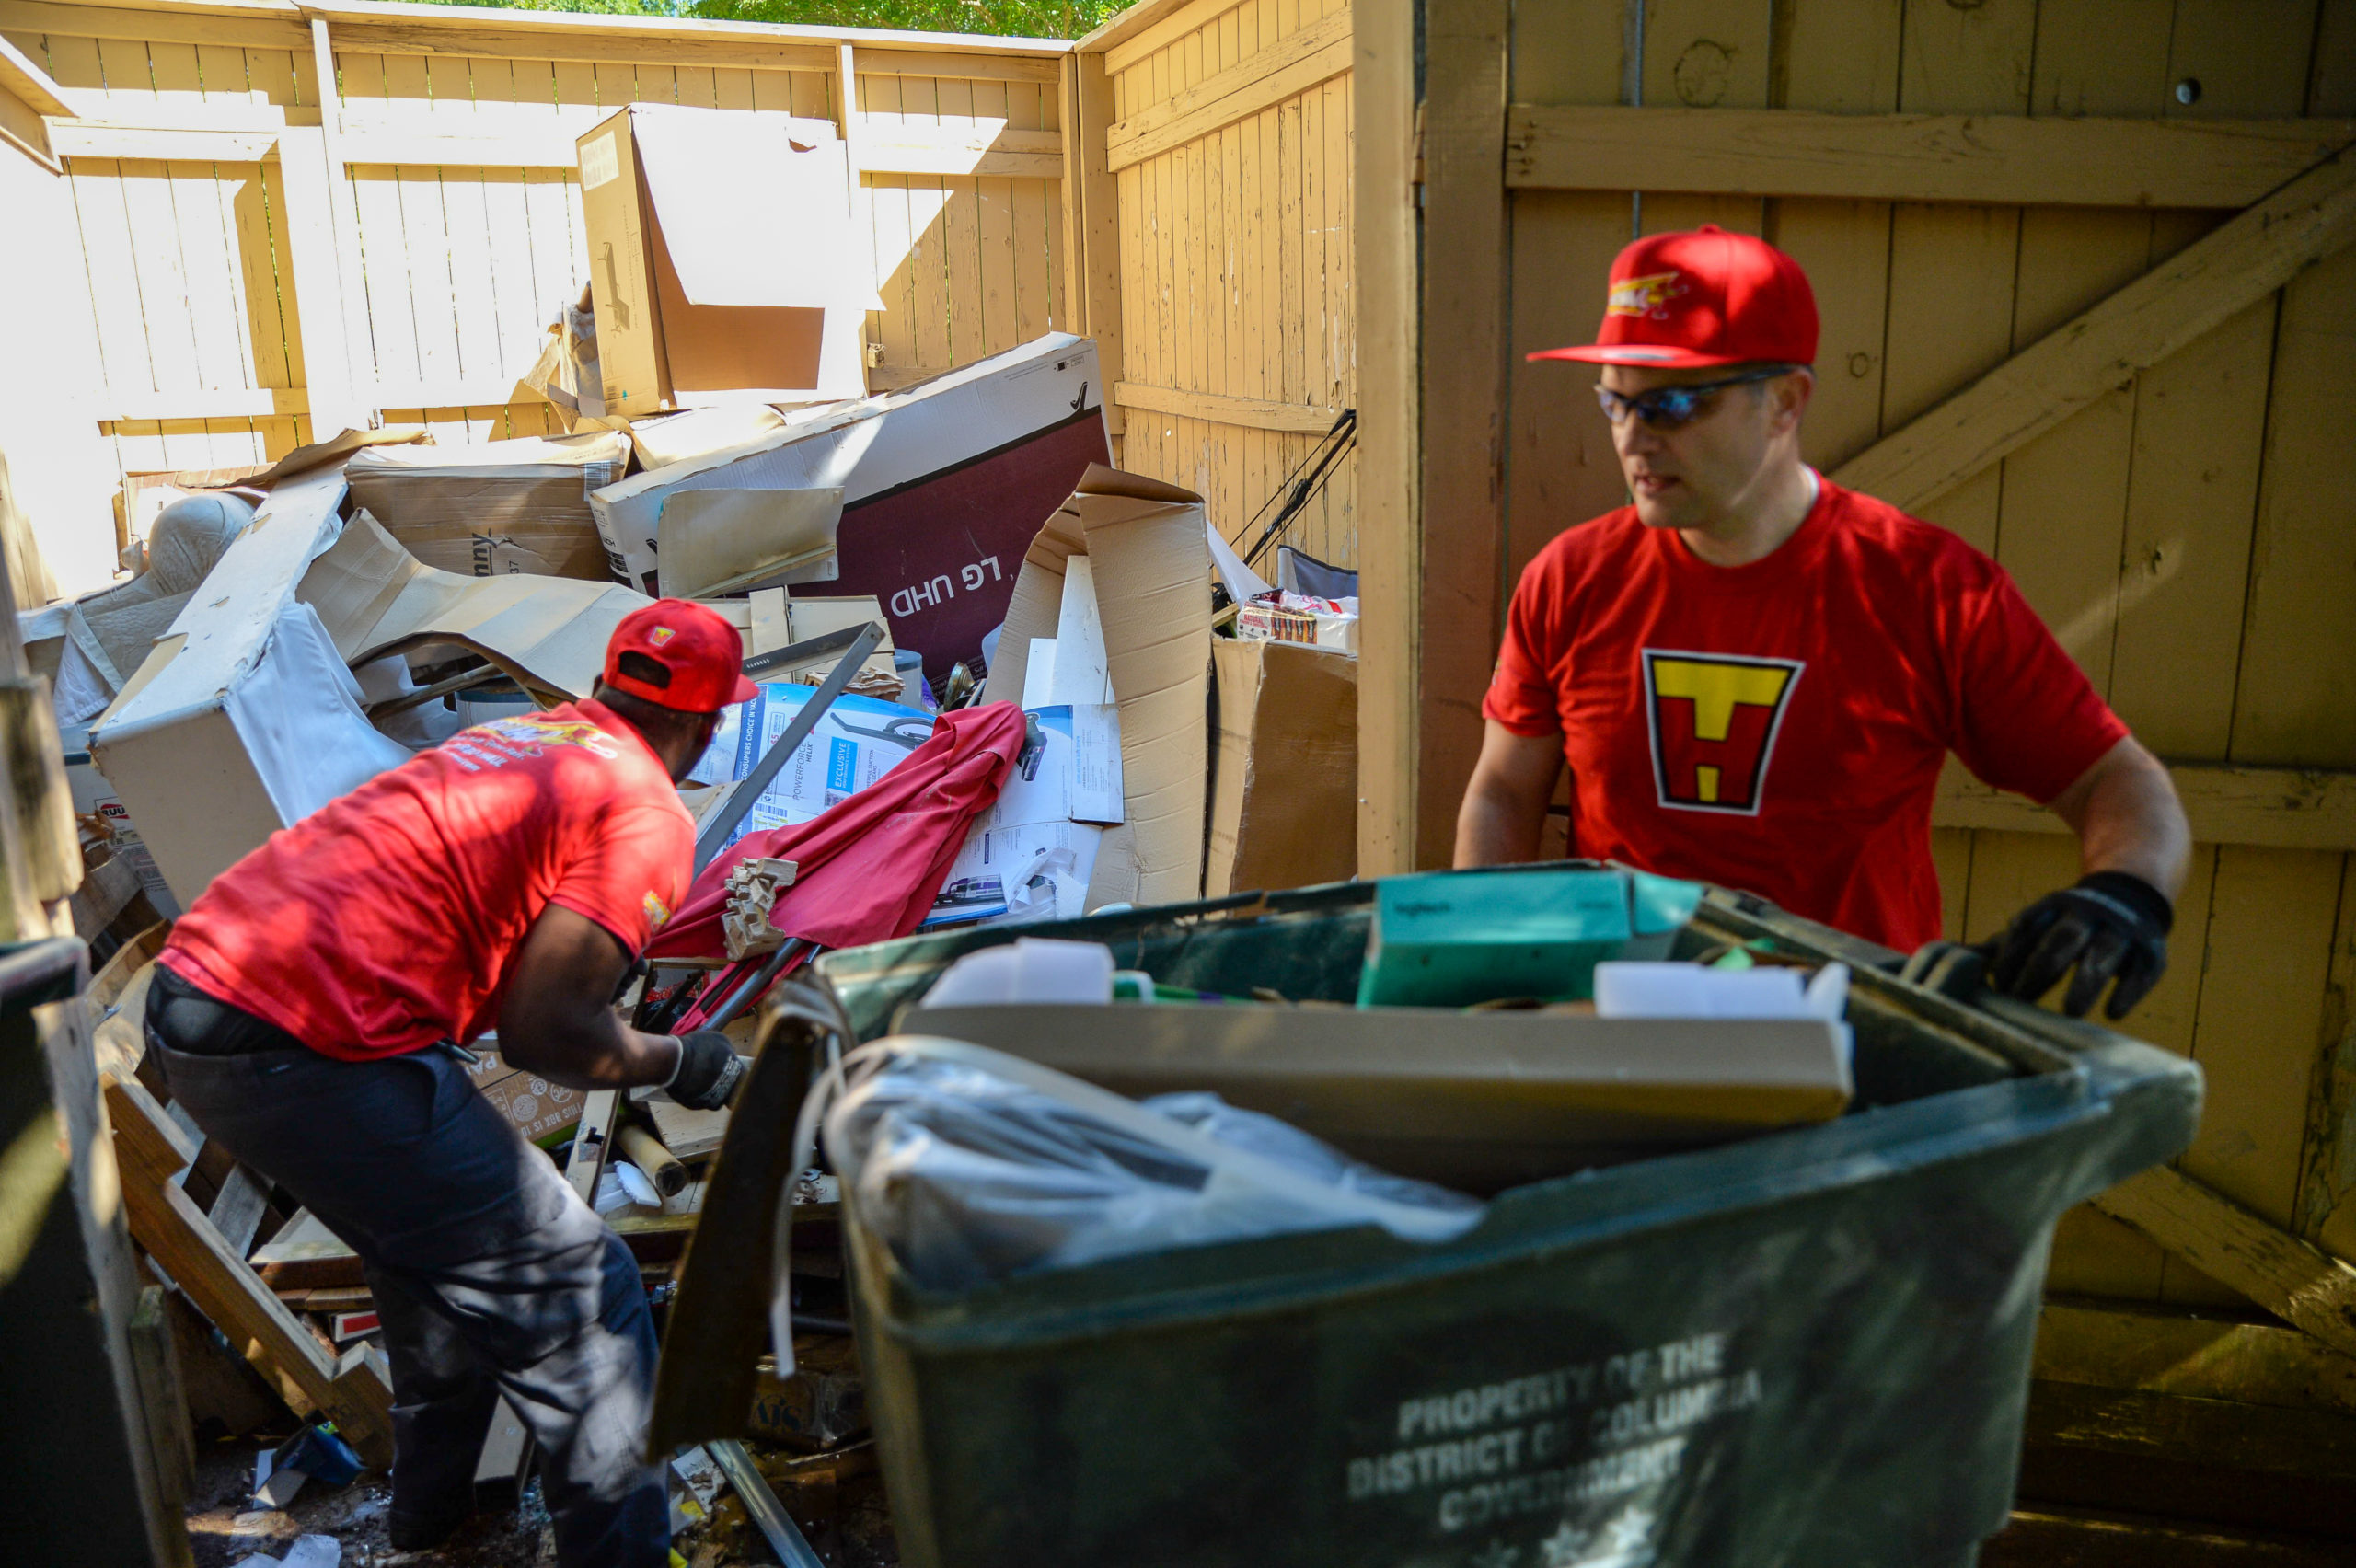 District Heights employees load trash into a bin